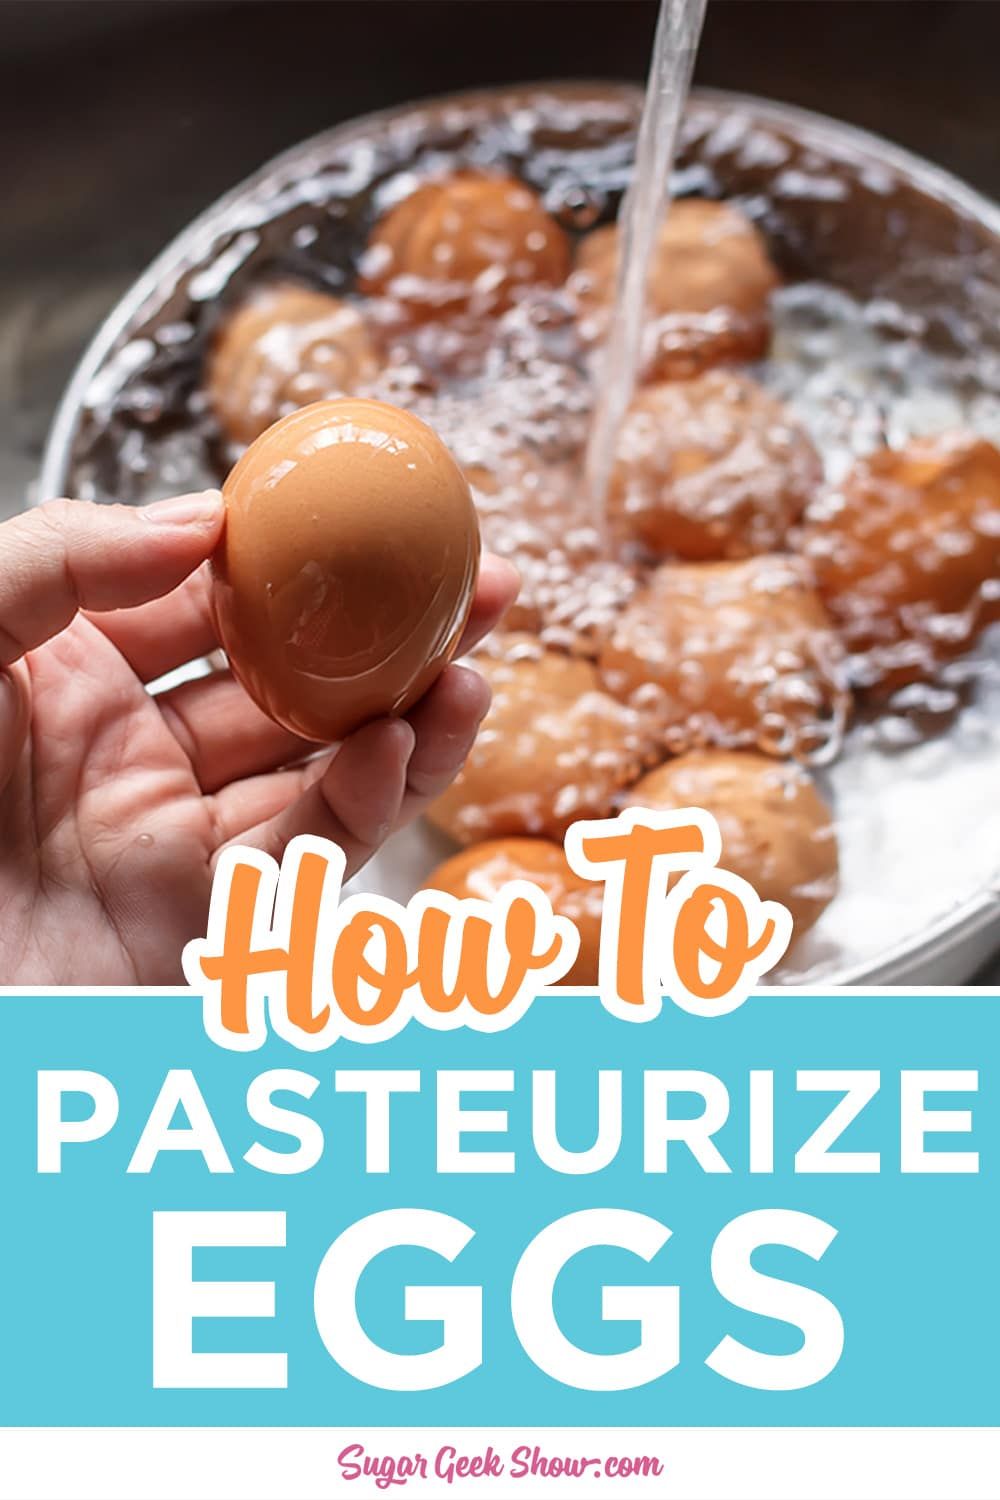 How To Pasteurize Eggs